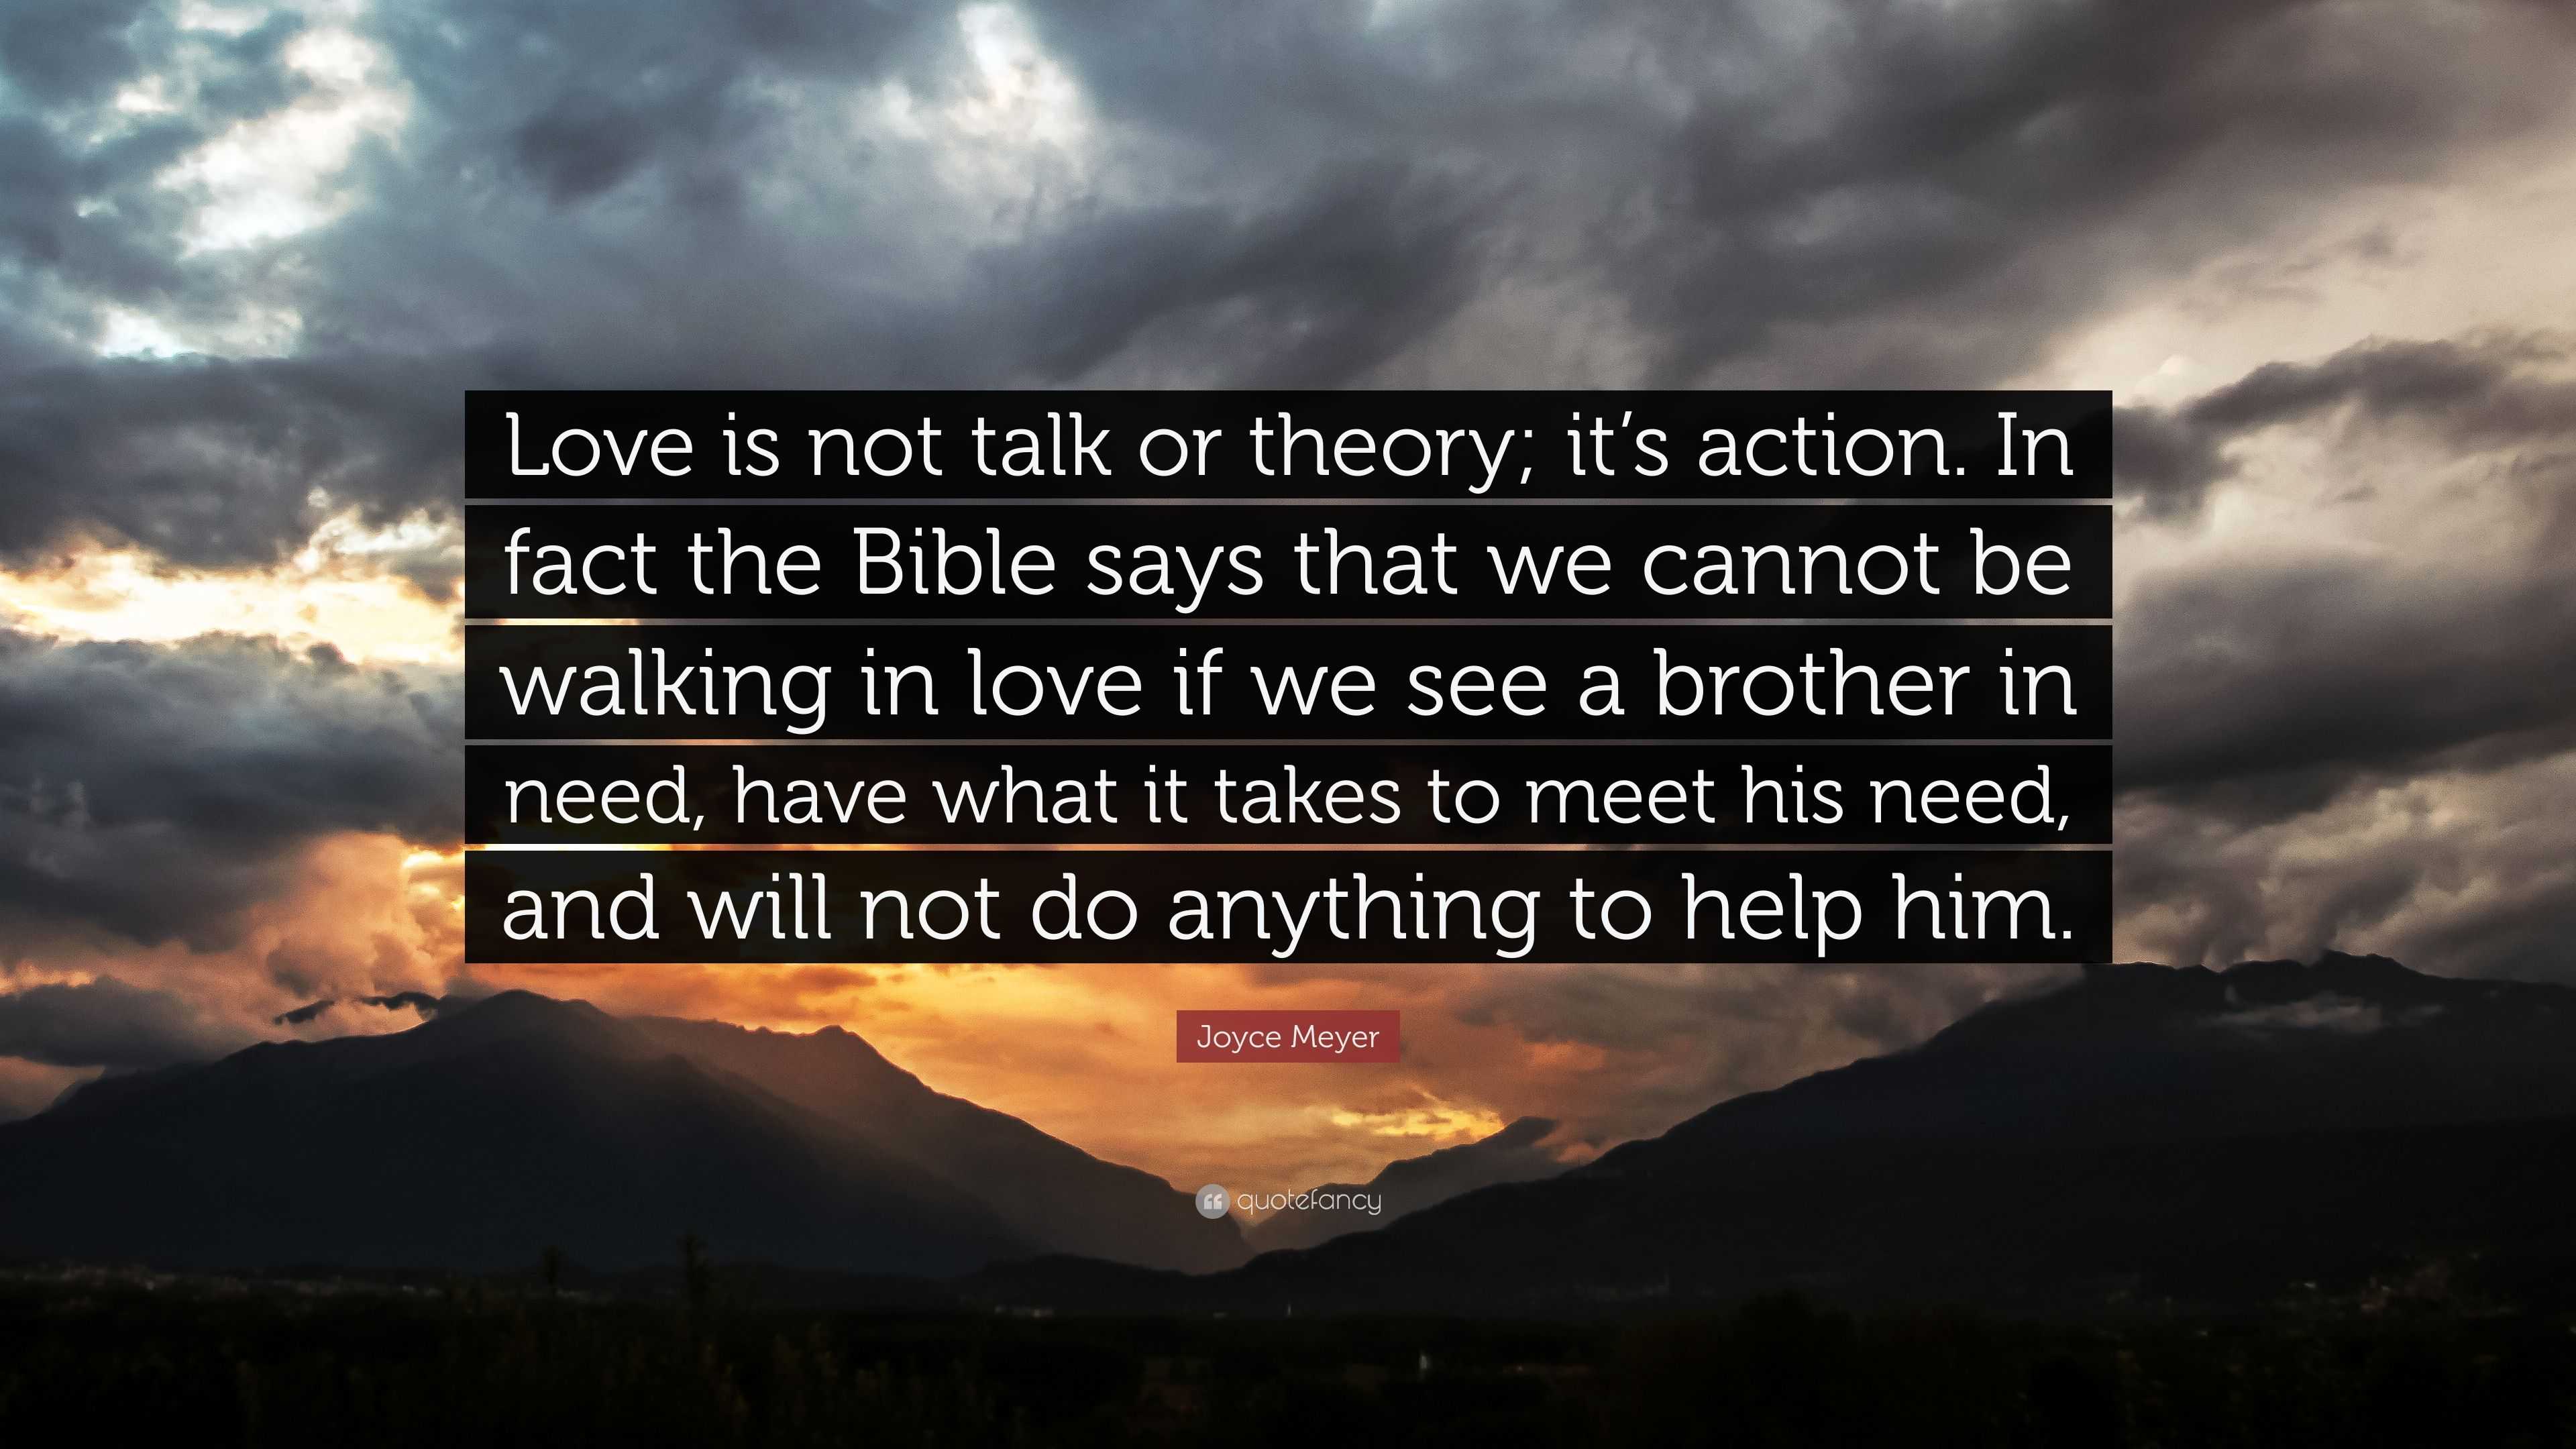 Joyce Meyer Quote “Love is not talk or theory it s action In